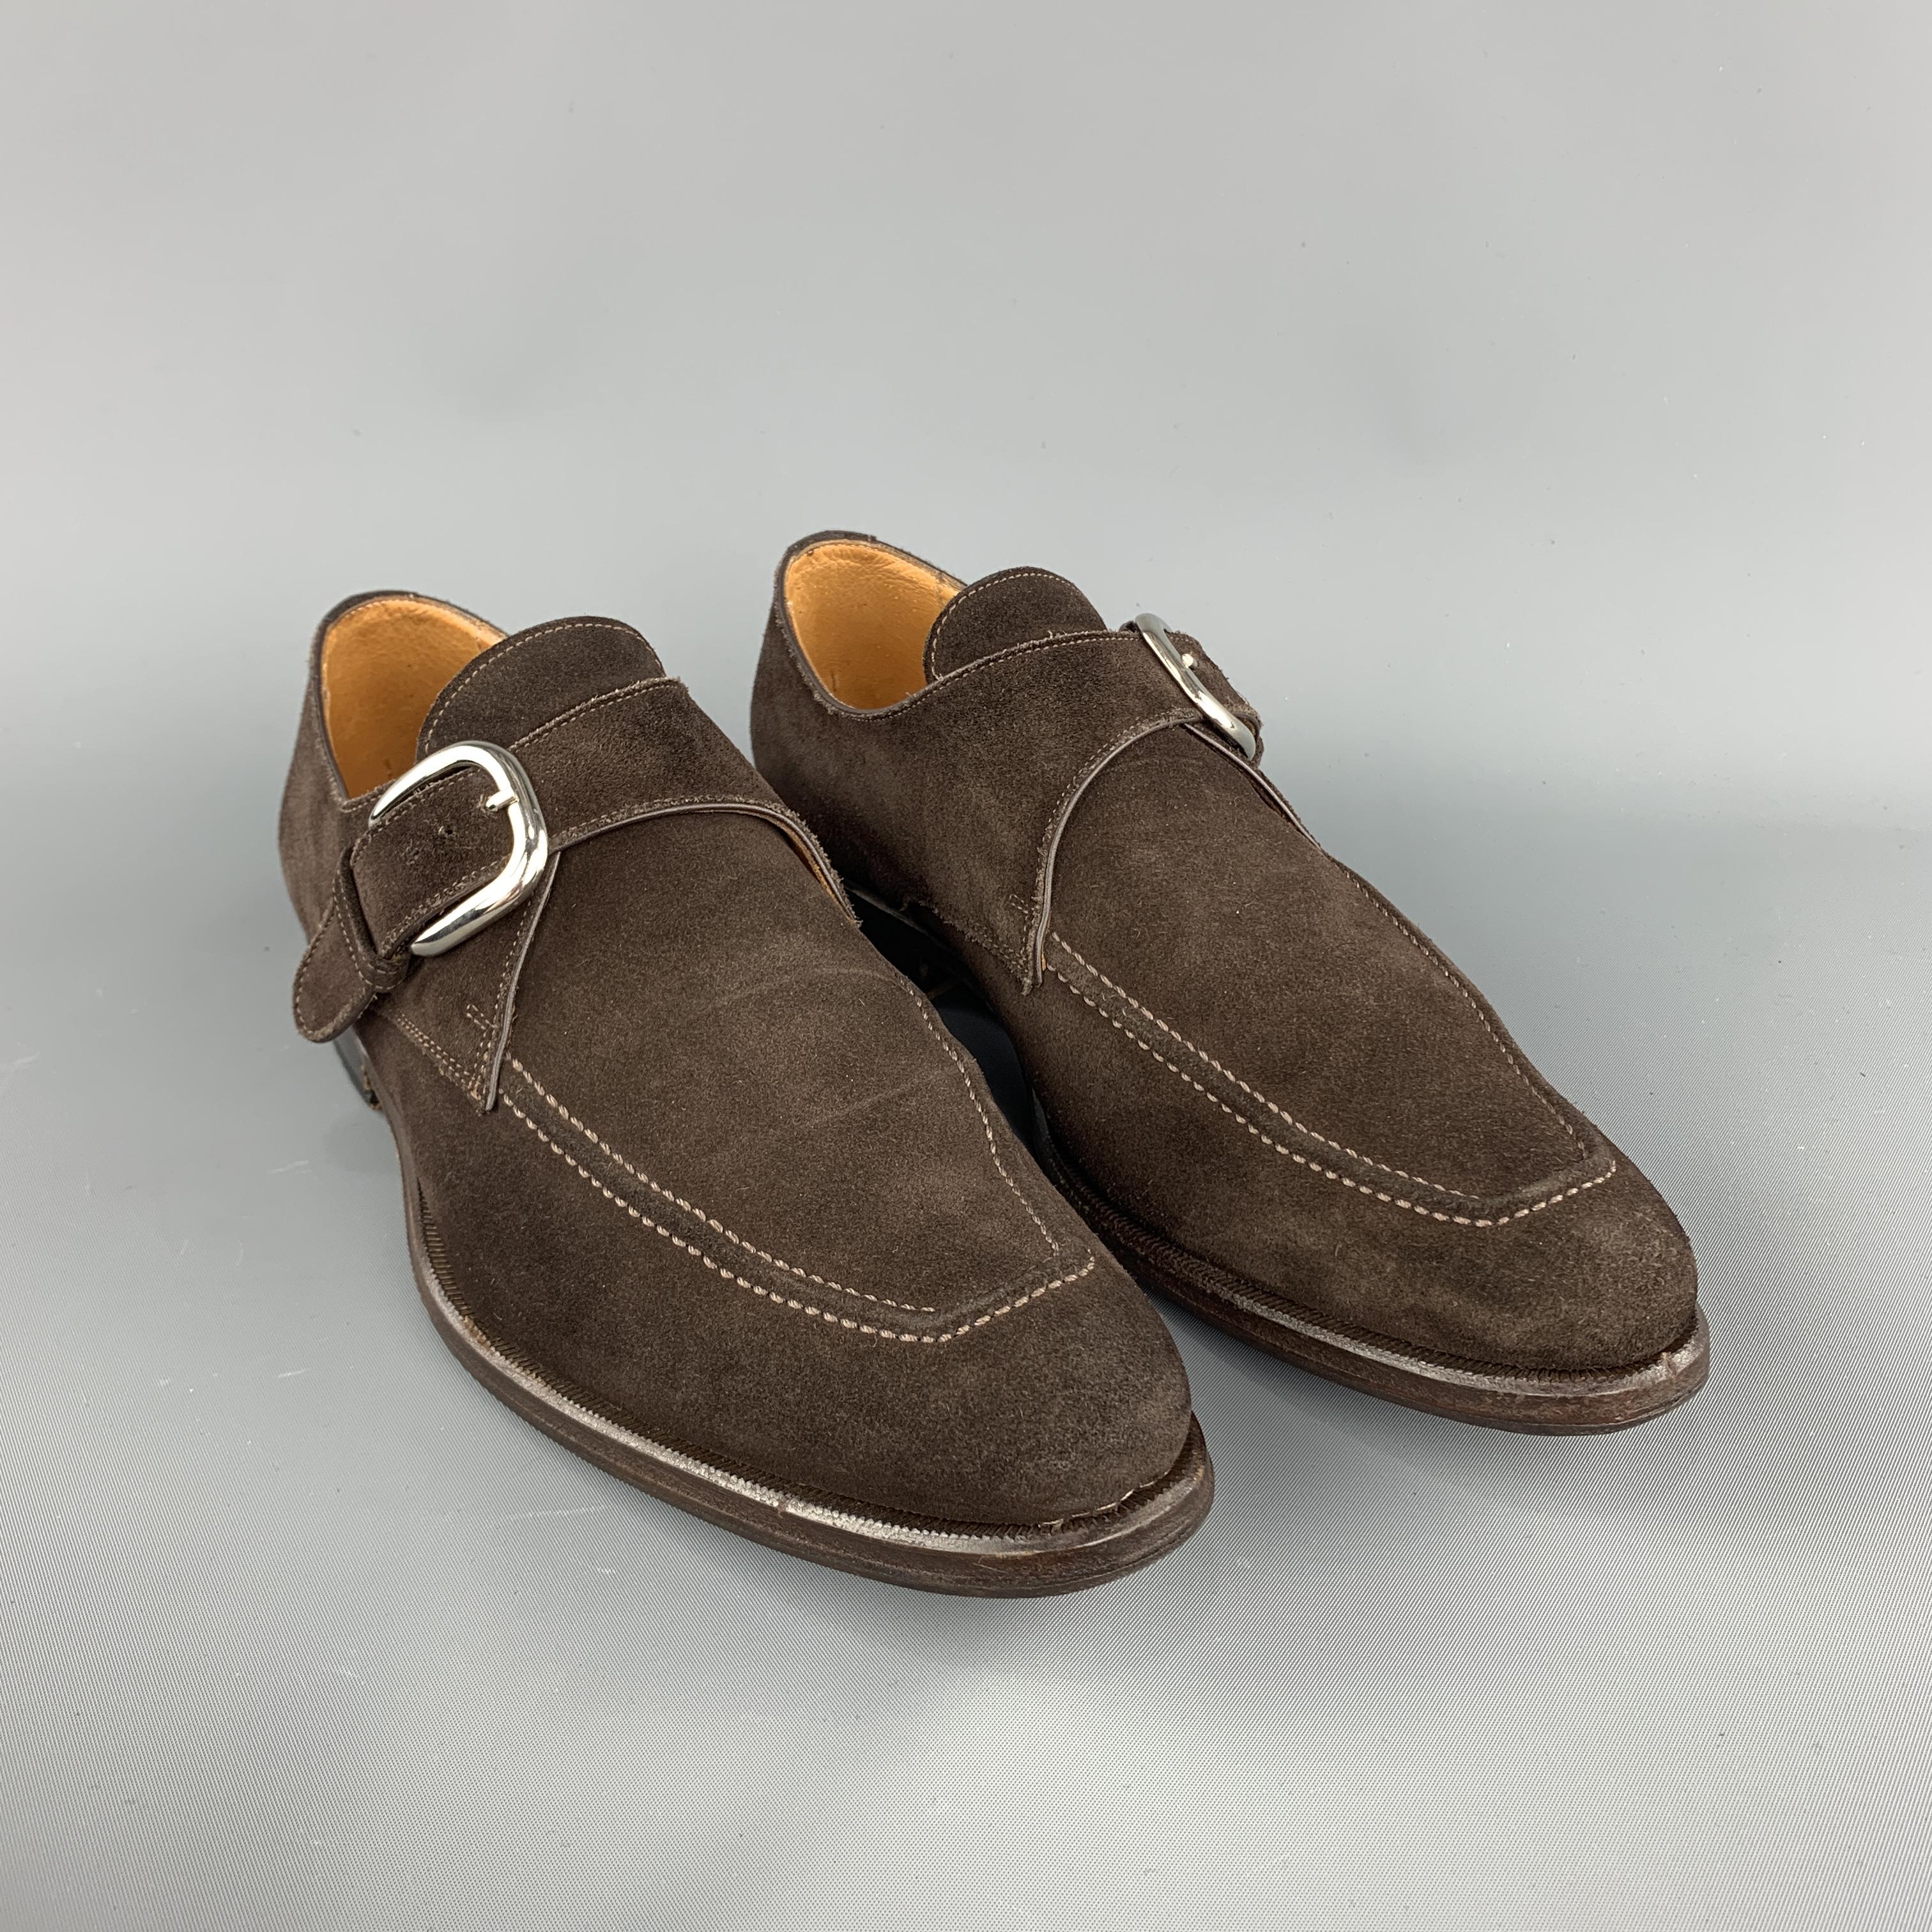 CERTO loafer comes in a brown suede featuring a monk strap style with silver tone buckle detail and a wooden sole. Handmade in Italy.
 
Excellent Pre-Owned Condition.
Marked: 40.5
 
Measurements:
 
Outsole: 12 in. x 4.5 in.